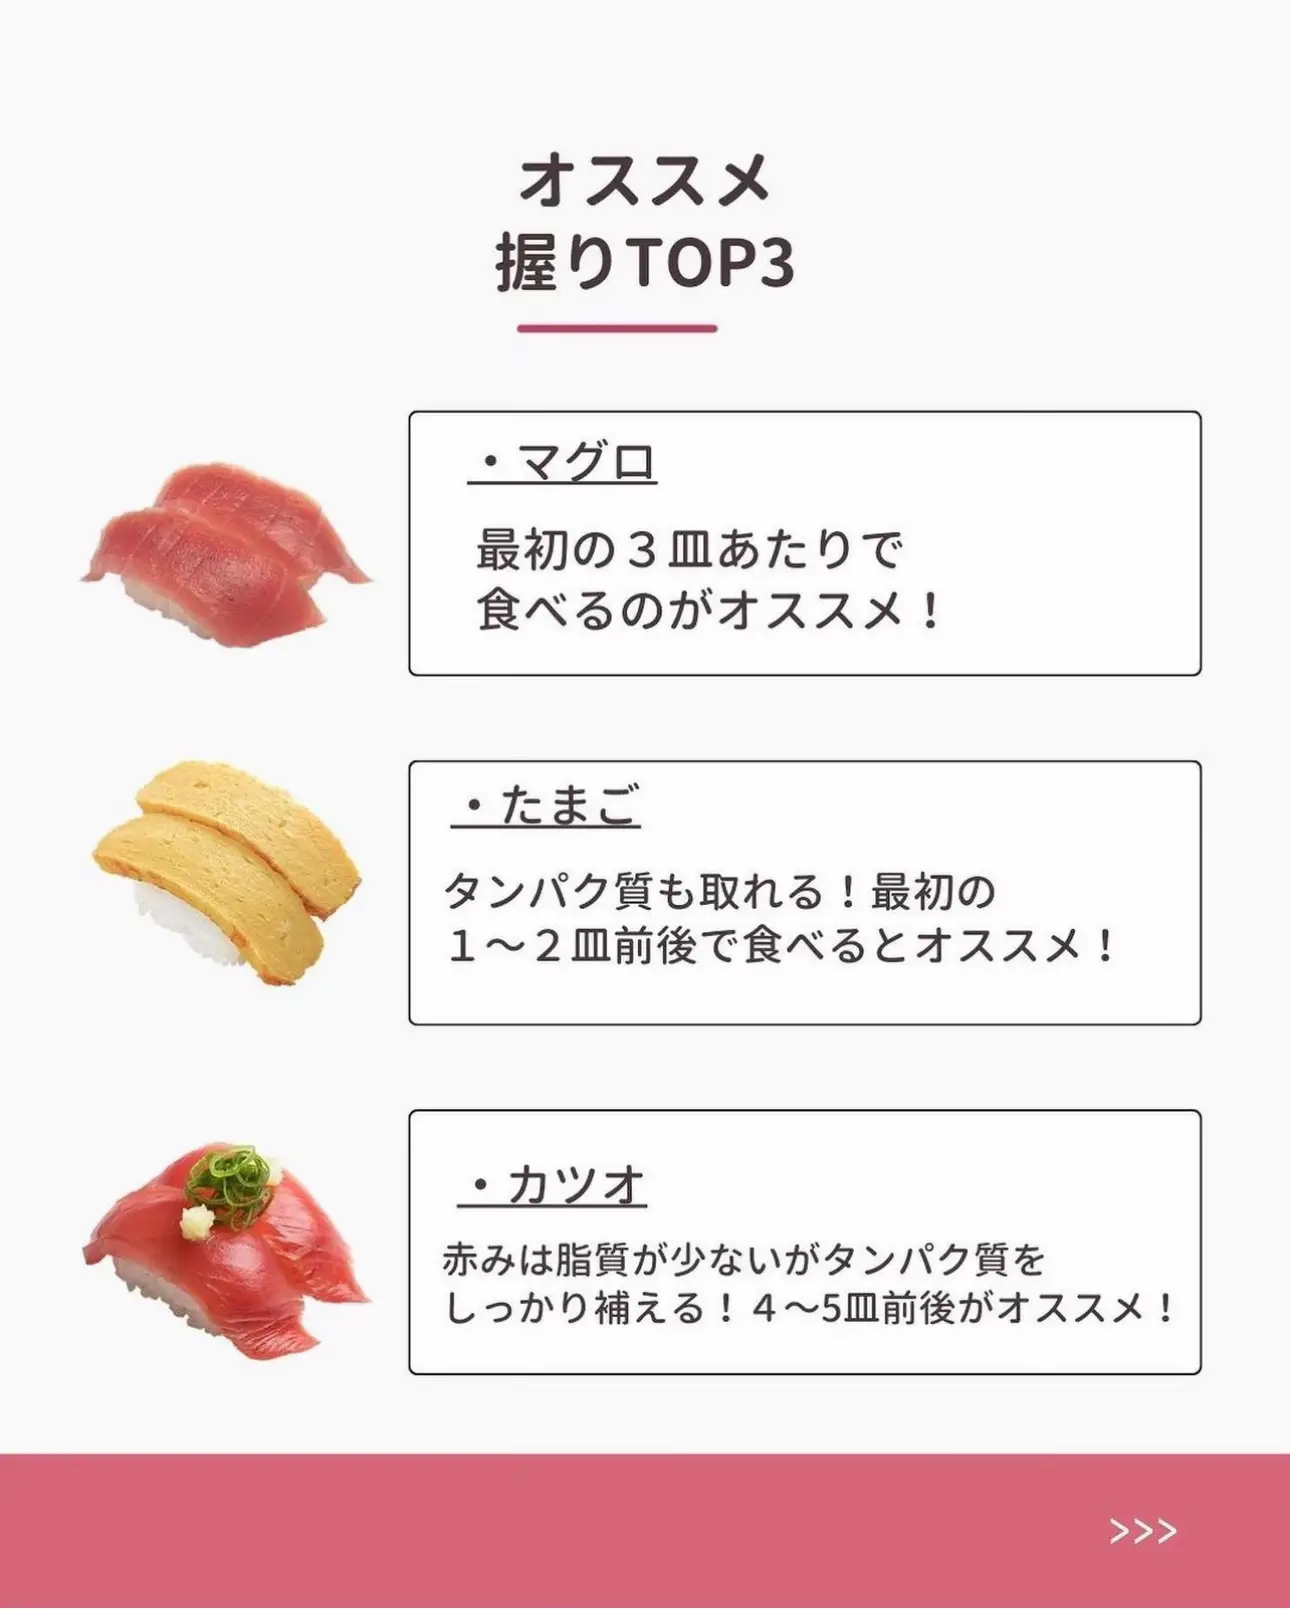 Top Rated Sushi Delivery - Lemon8検索